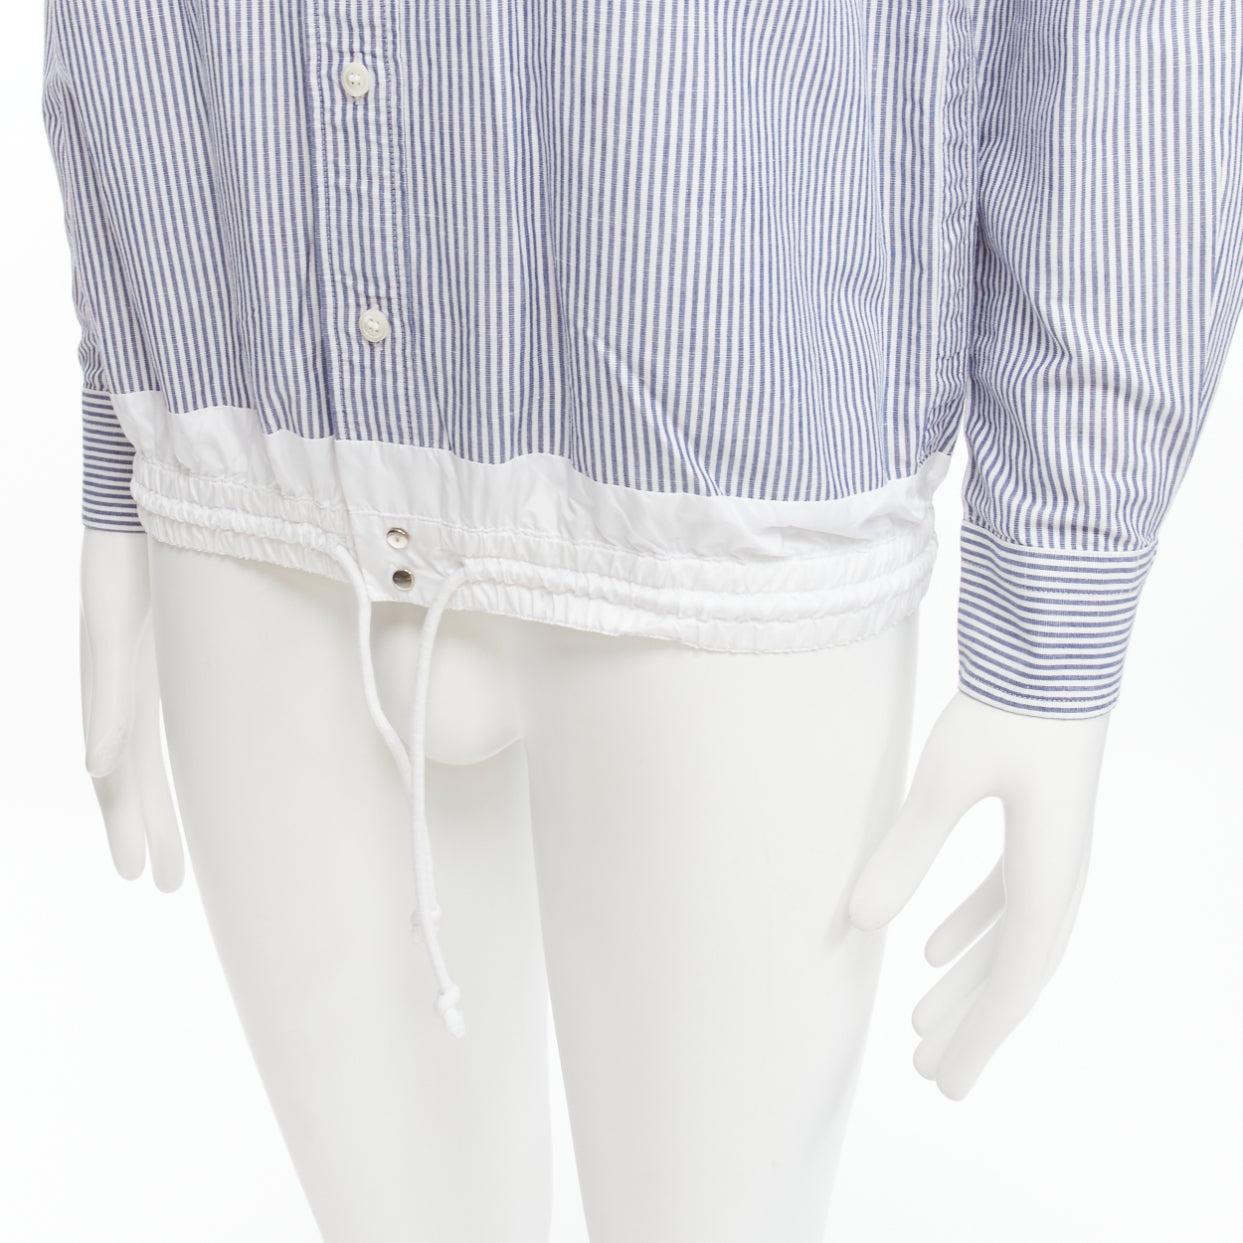 SACAI blue white striped cotton linen nylon drawstring shirt JP2 M
Reference: JSLE/A00053
Brand: Sacai
Designer: Chitose Abe
Material: Cotton, Linen
Color: White, Blue
Pattern: Striped
Closure: Button
Extra Details: Inverted pleat back.
Made in: